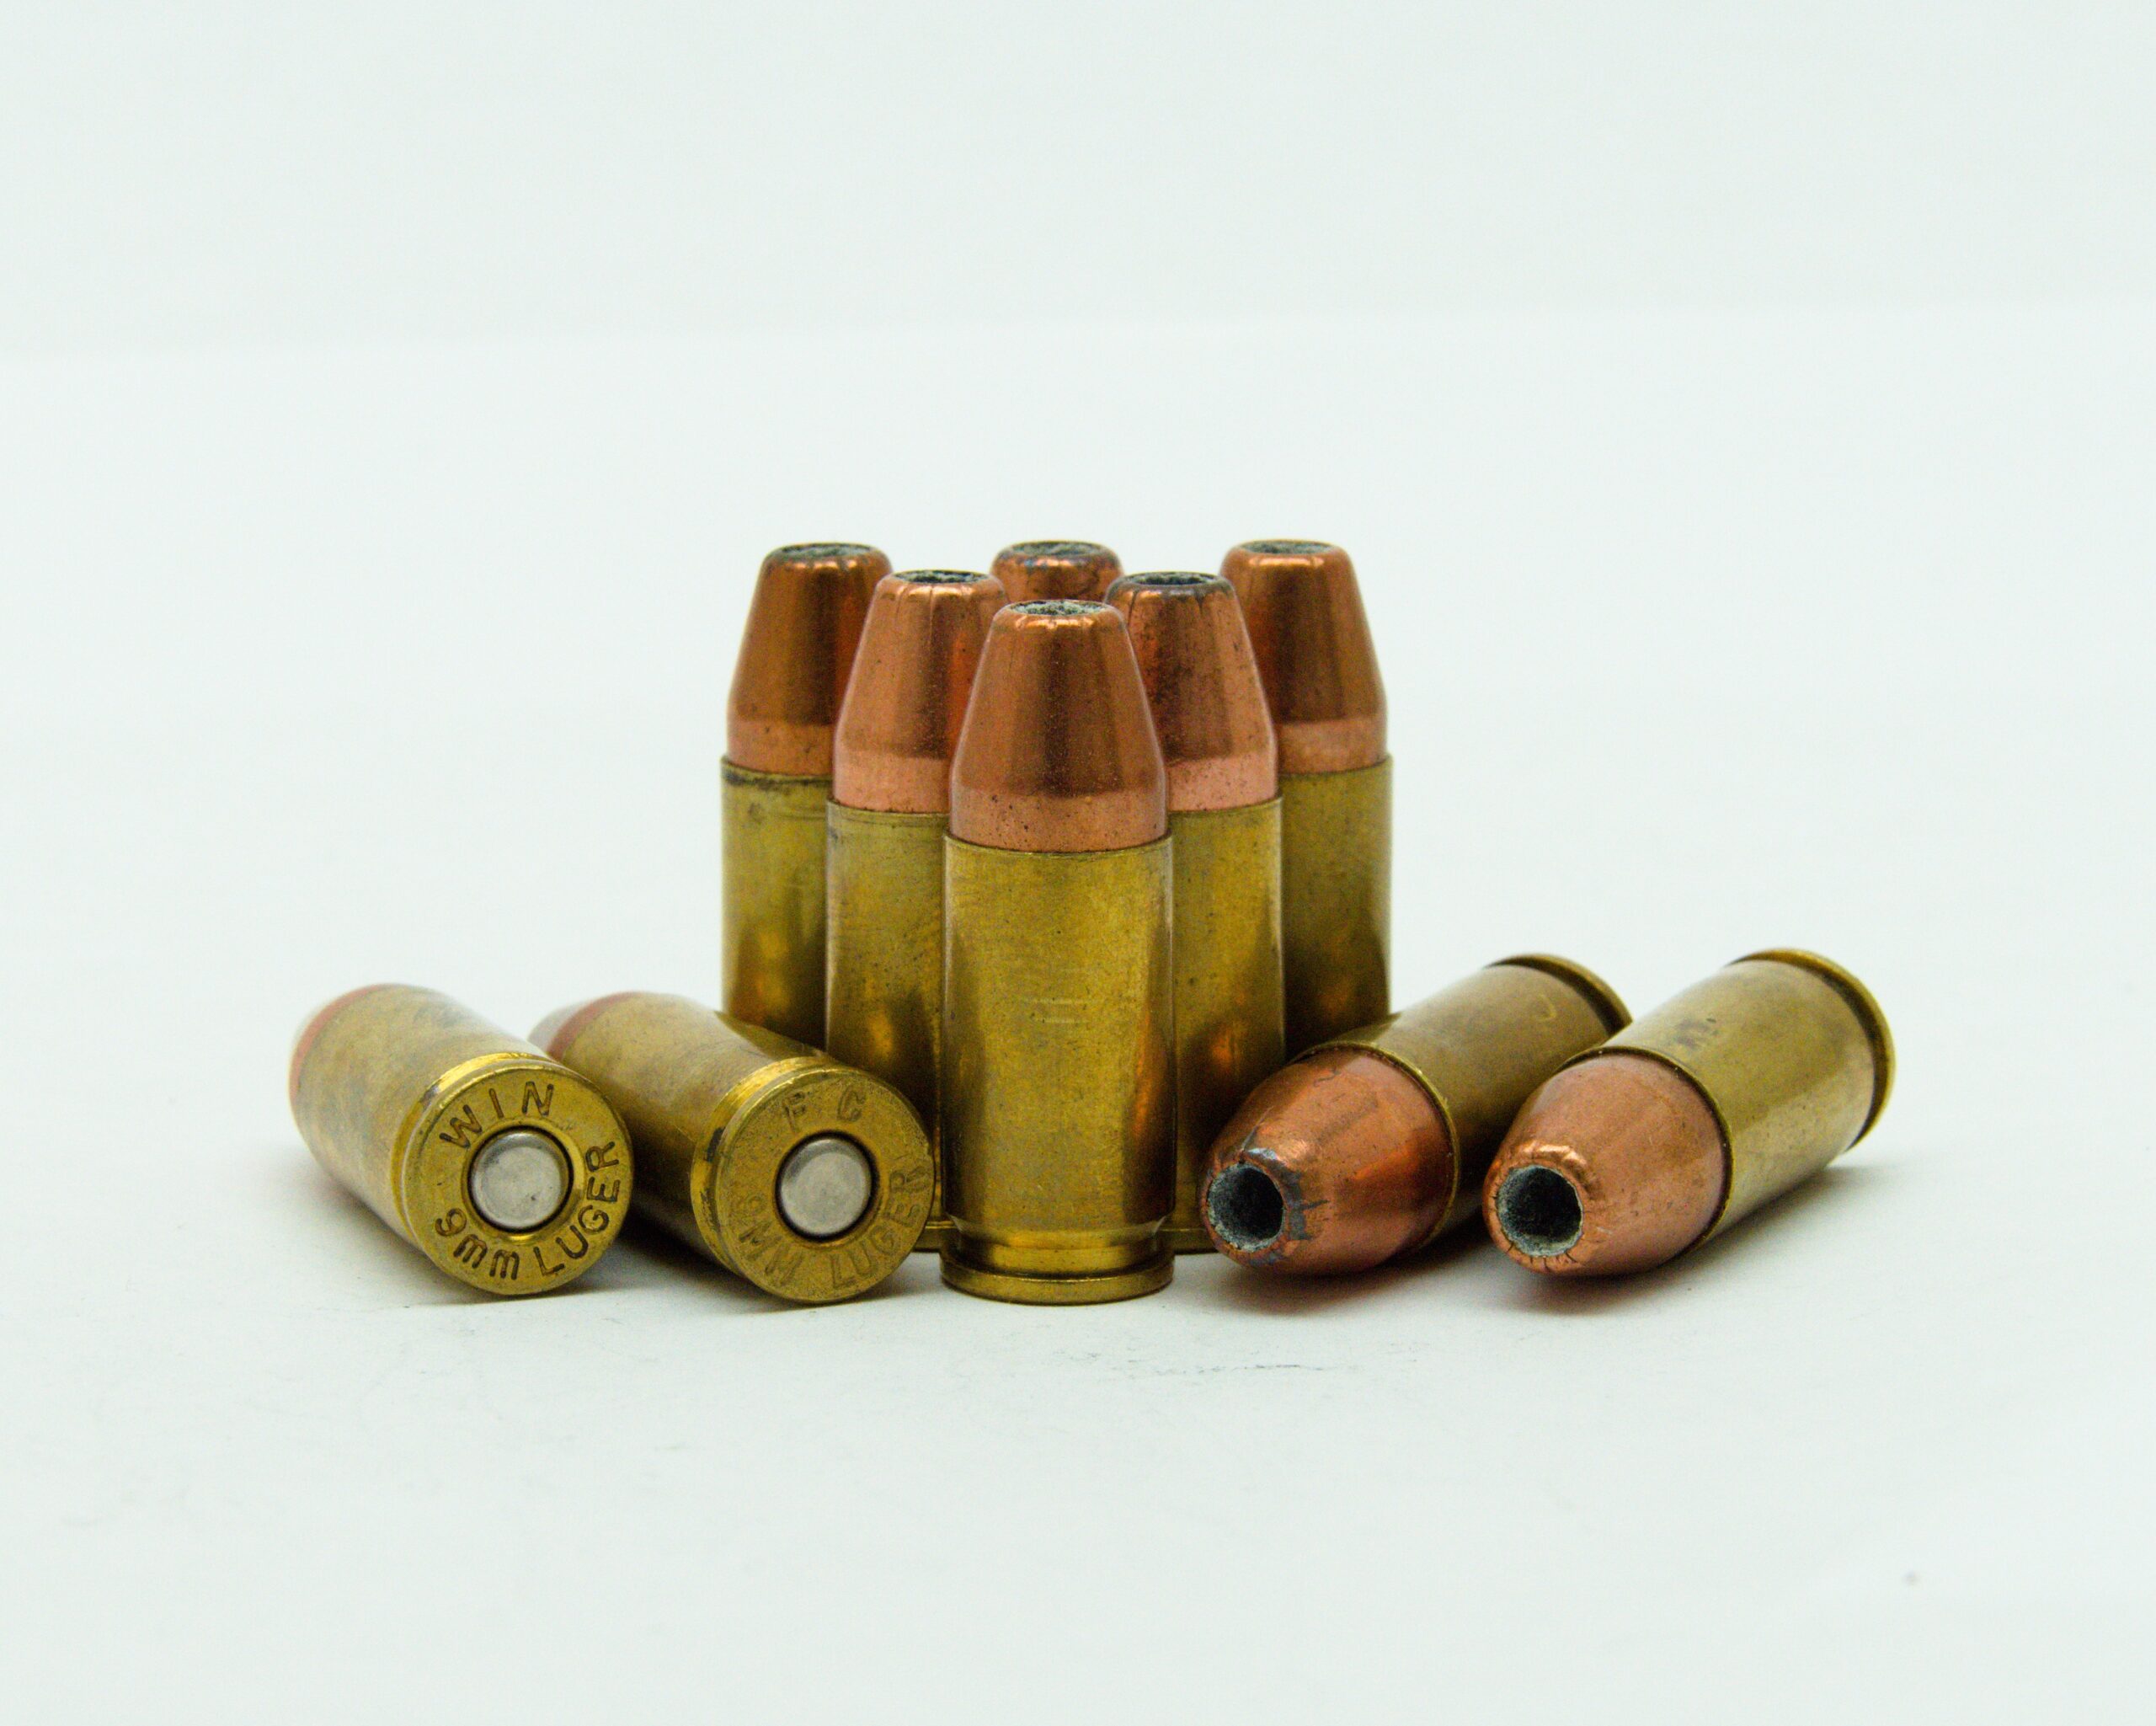 9MM Luger Ammunition With 115 Grain Hollow Point Personal Defense ...